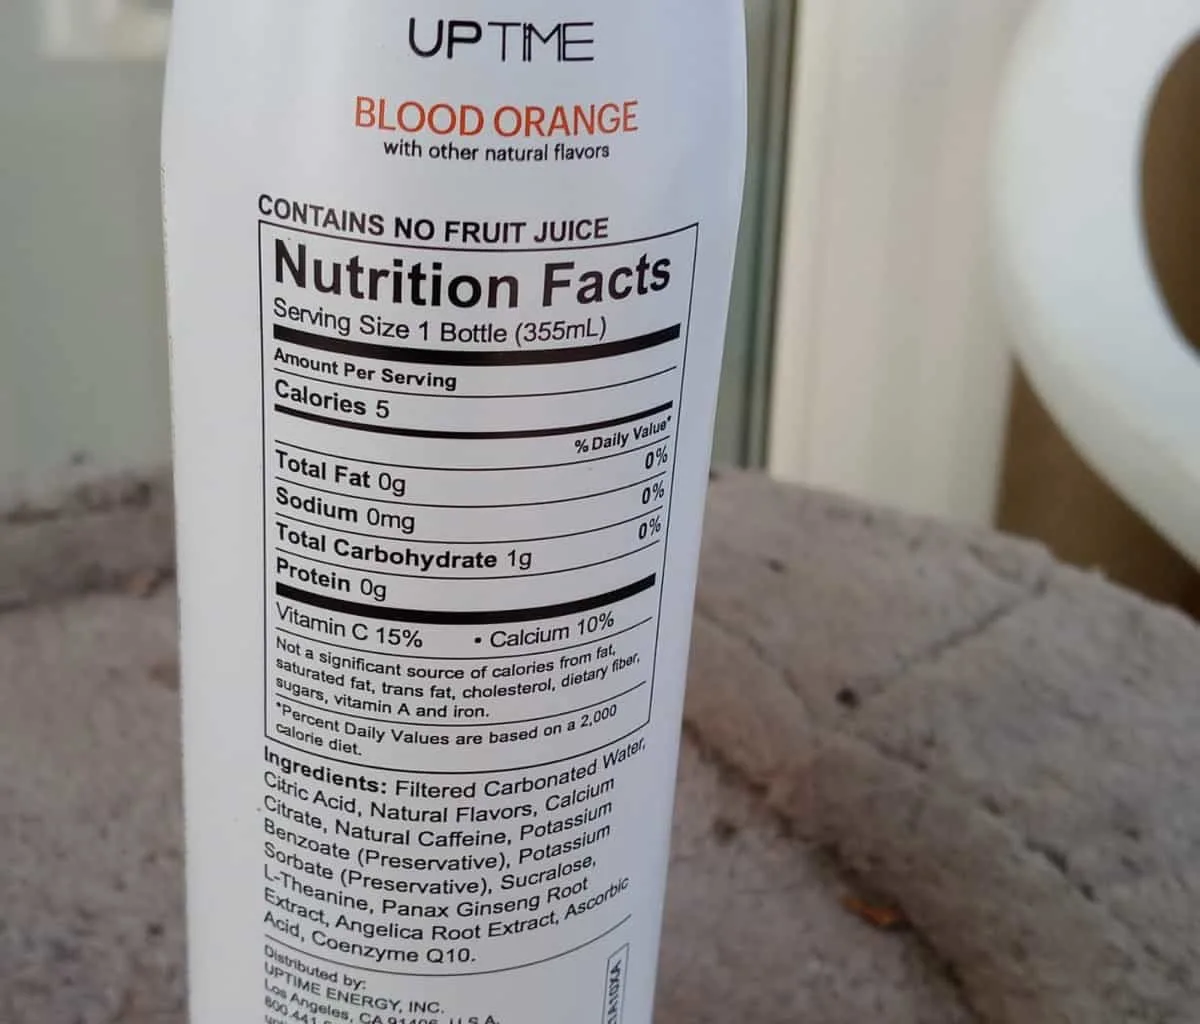 Nutrition facts of Uptime.